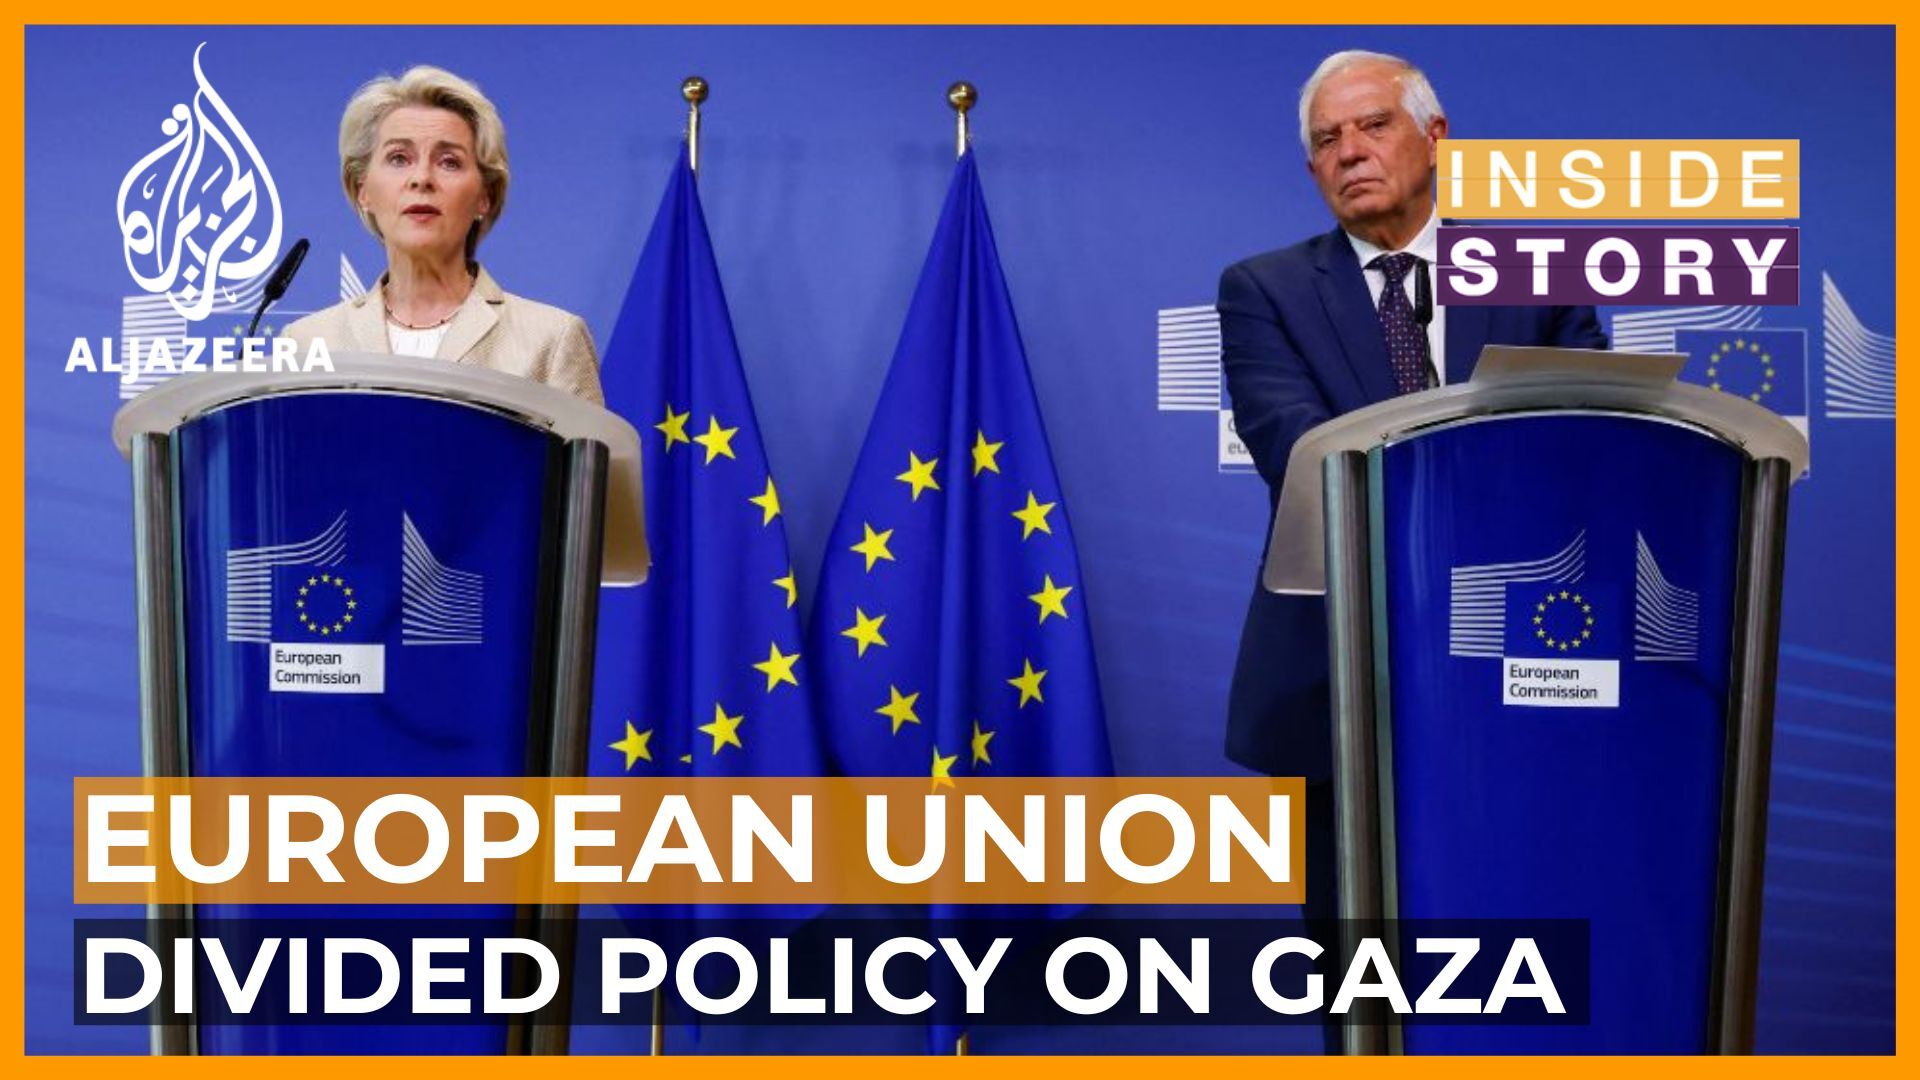 Can a divided EU have any meaningful policy on Gaza? | European Union